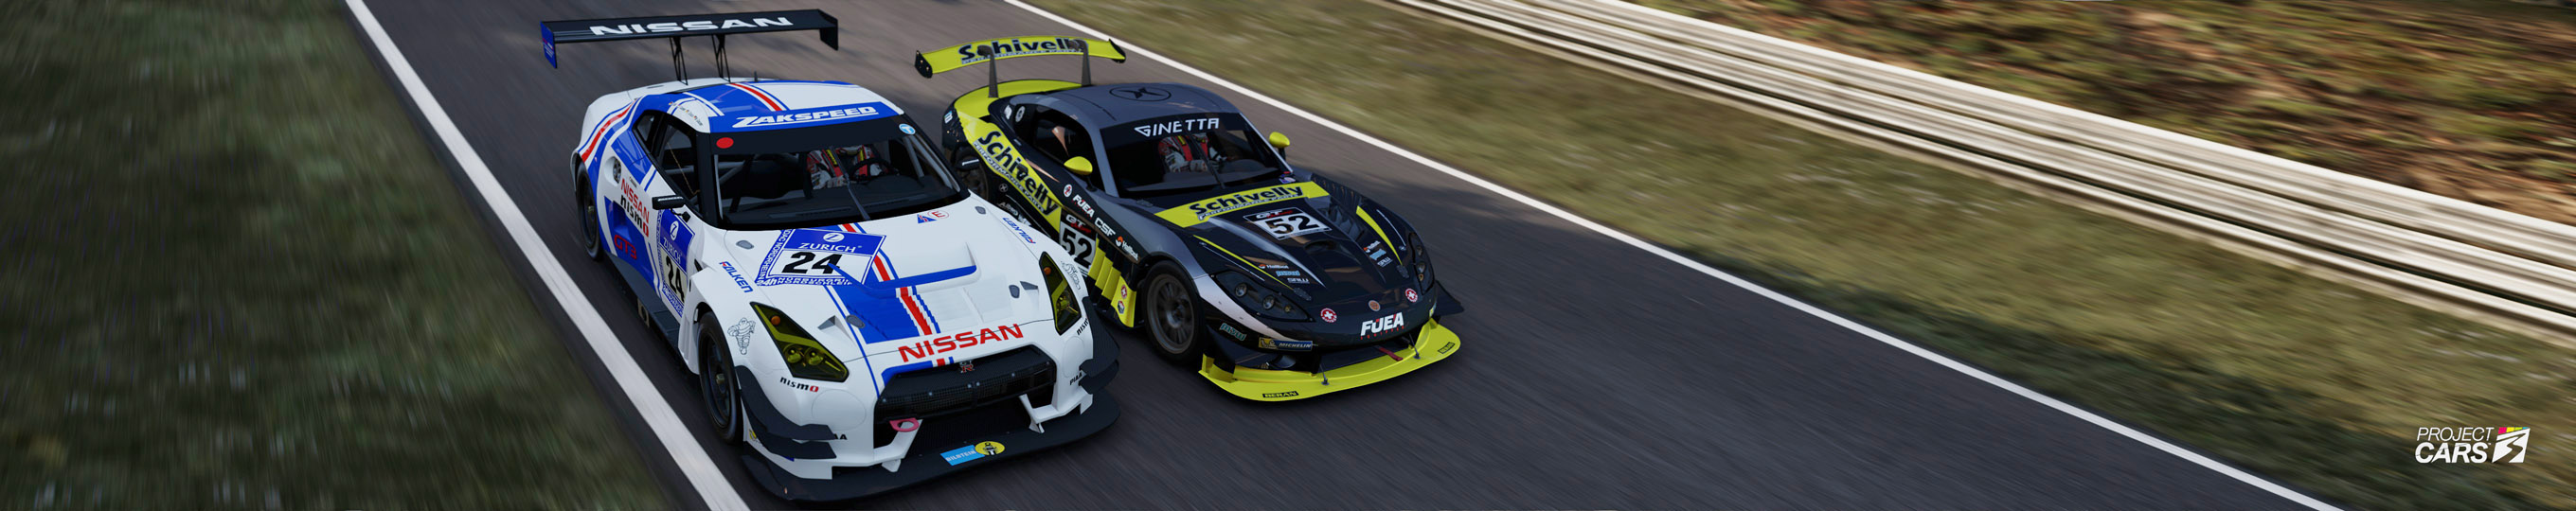 7 PROJECT CARS 3 GT3 at NORDSCHLEIFE crop copy.jpg